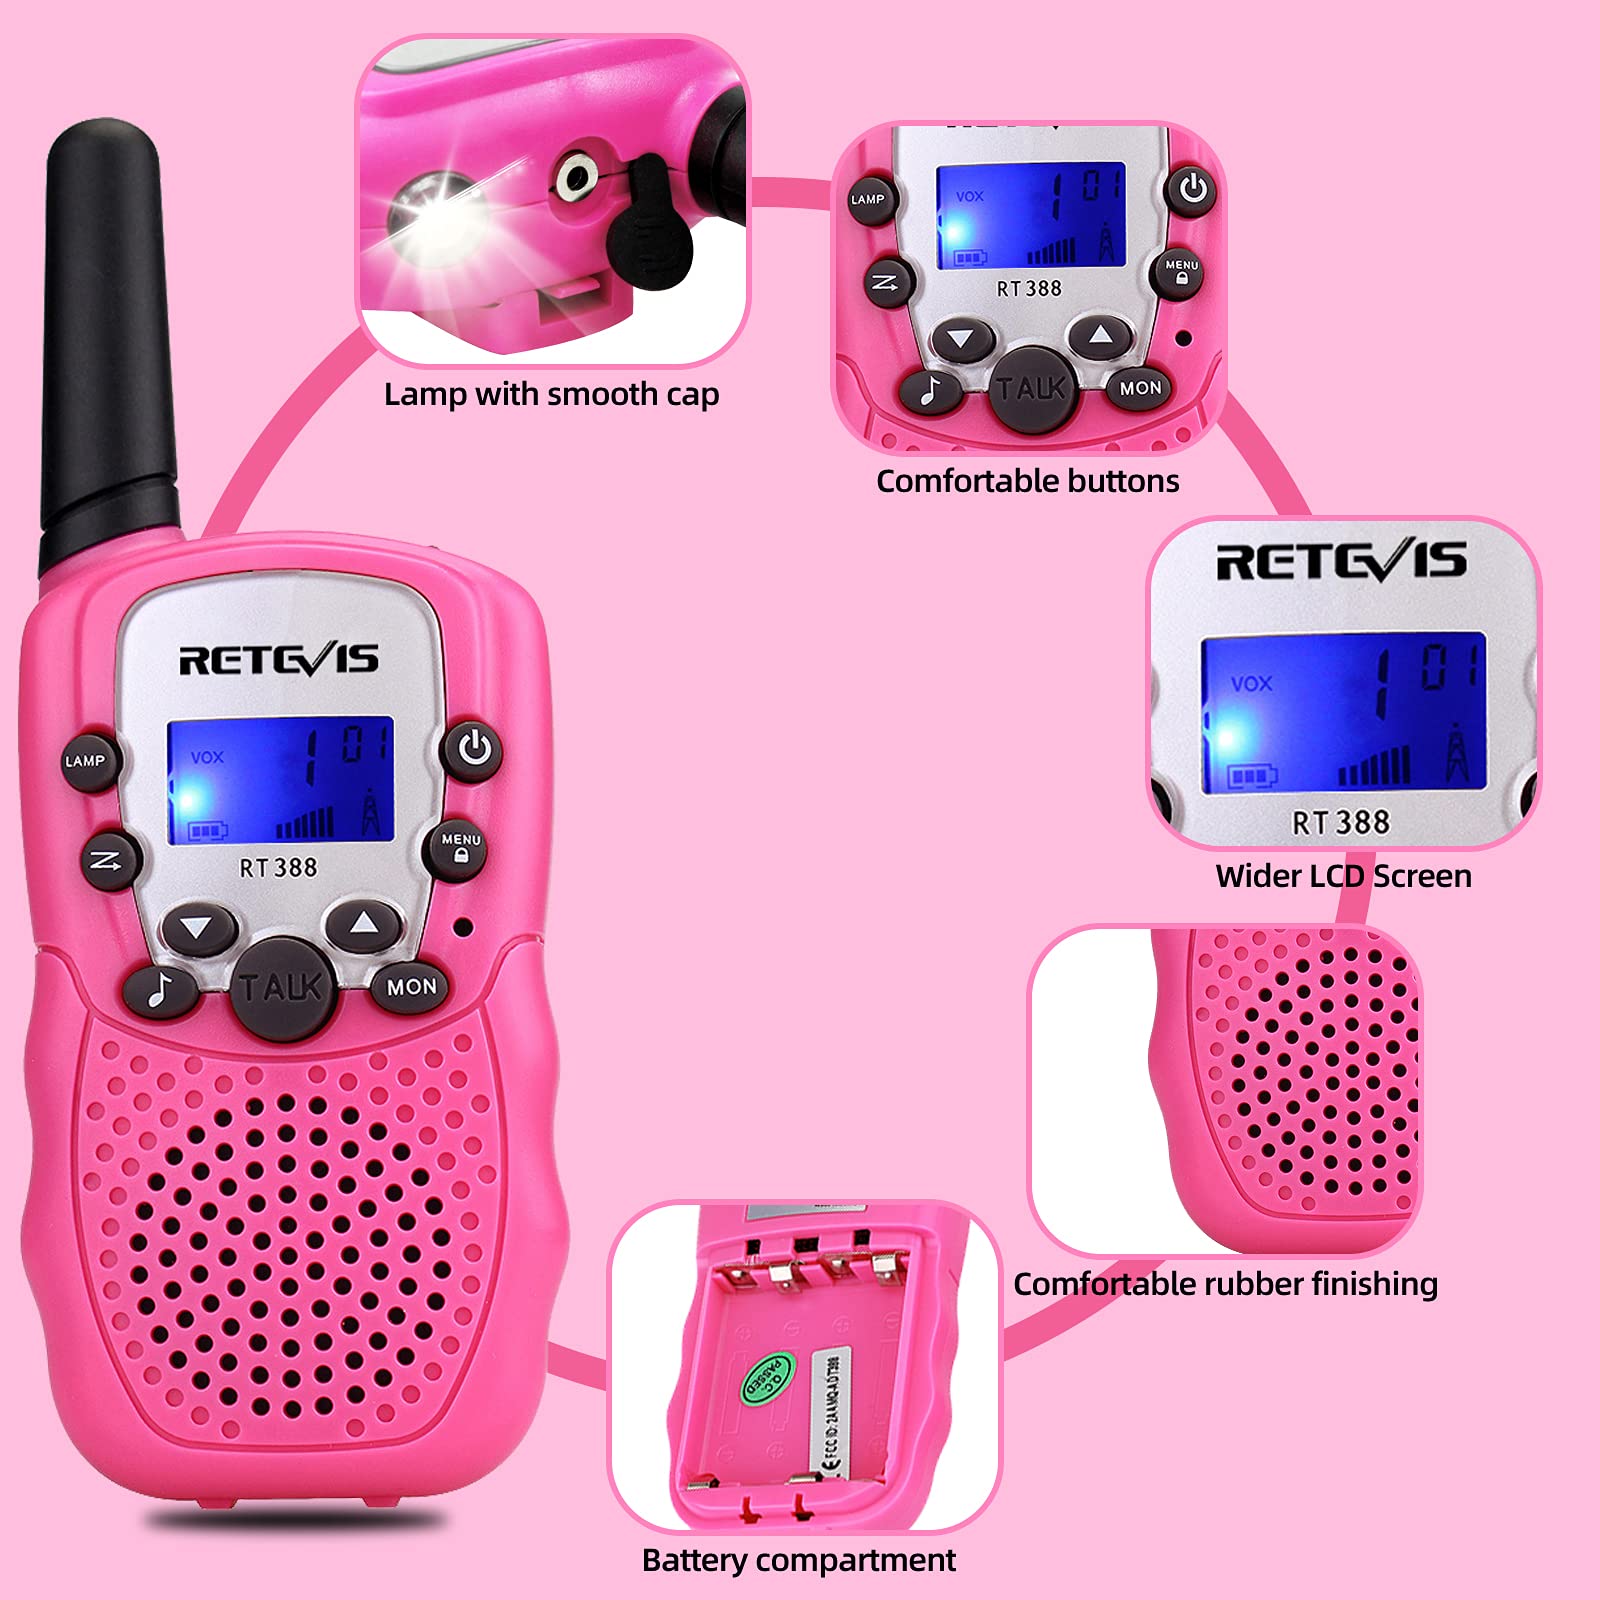 Retevis RT388 Walkie Talkies for Kids,Pink Kids Gifts for Girls Bundle with RT38 Mini Long Range 2 Way Radio,VOX Handsfree Kids Toys for Family Outdoor Camping Trip Hiking (4 Pack)